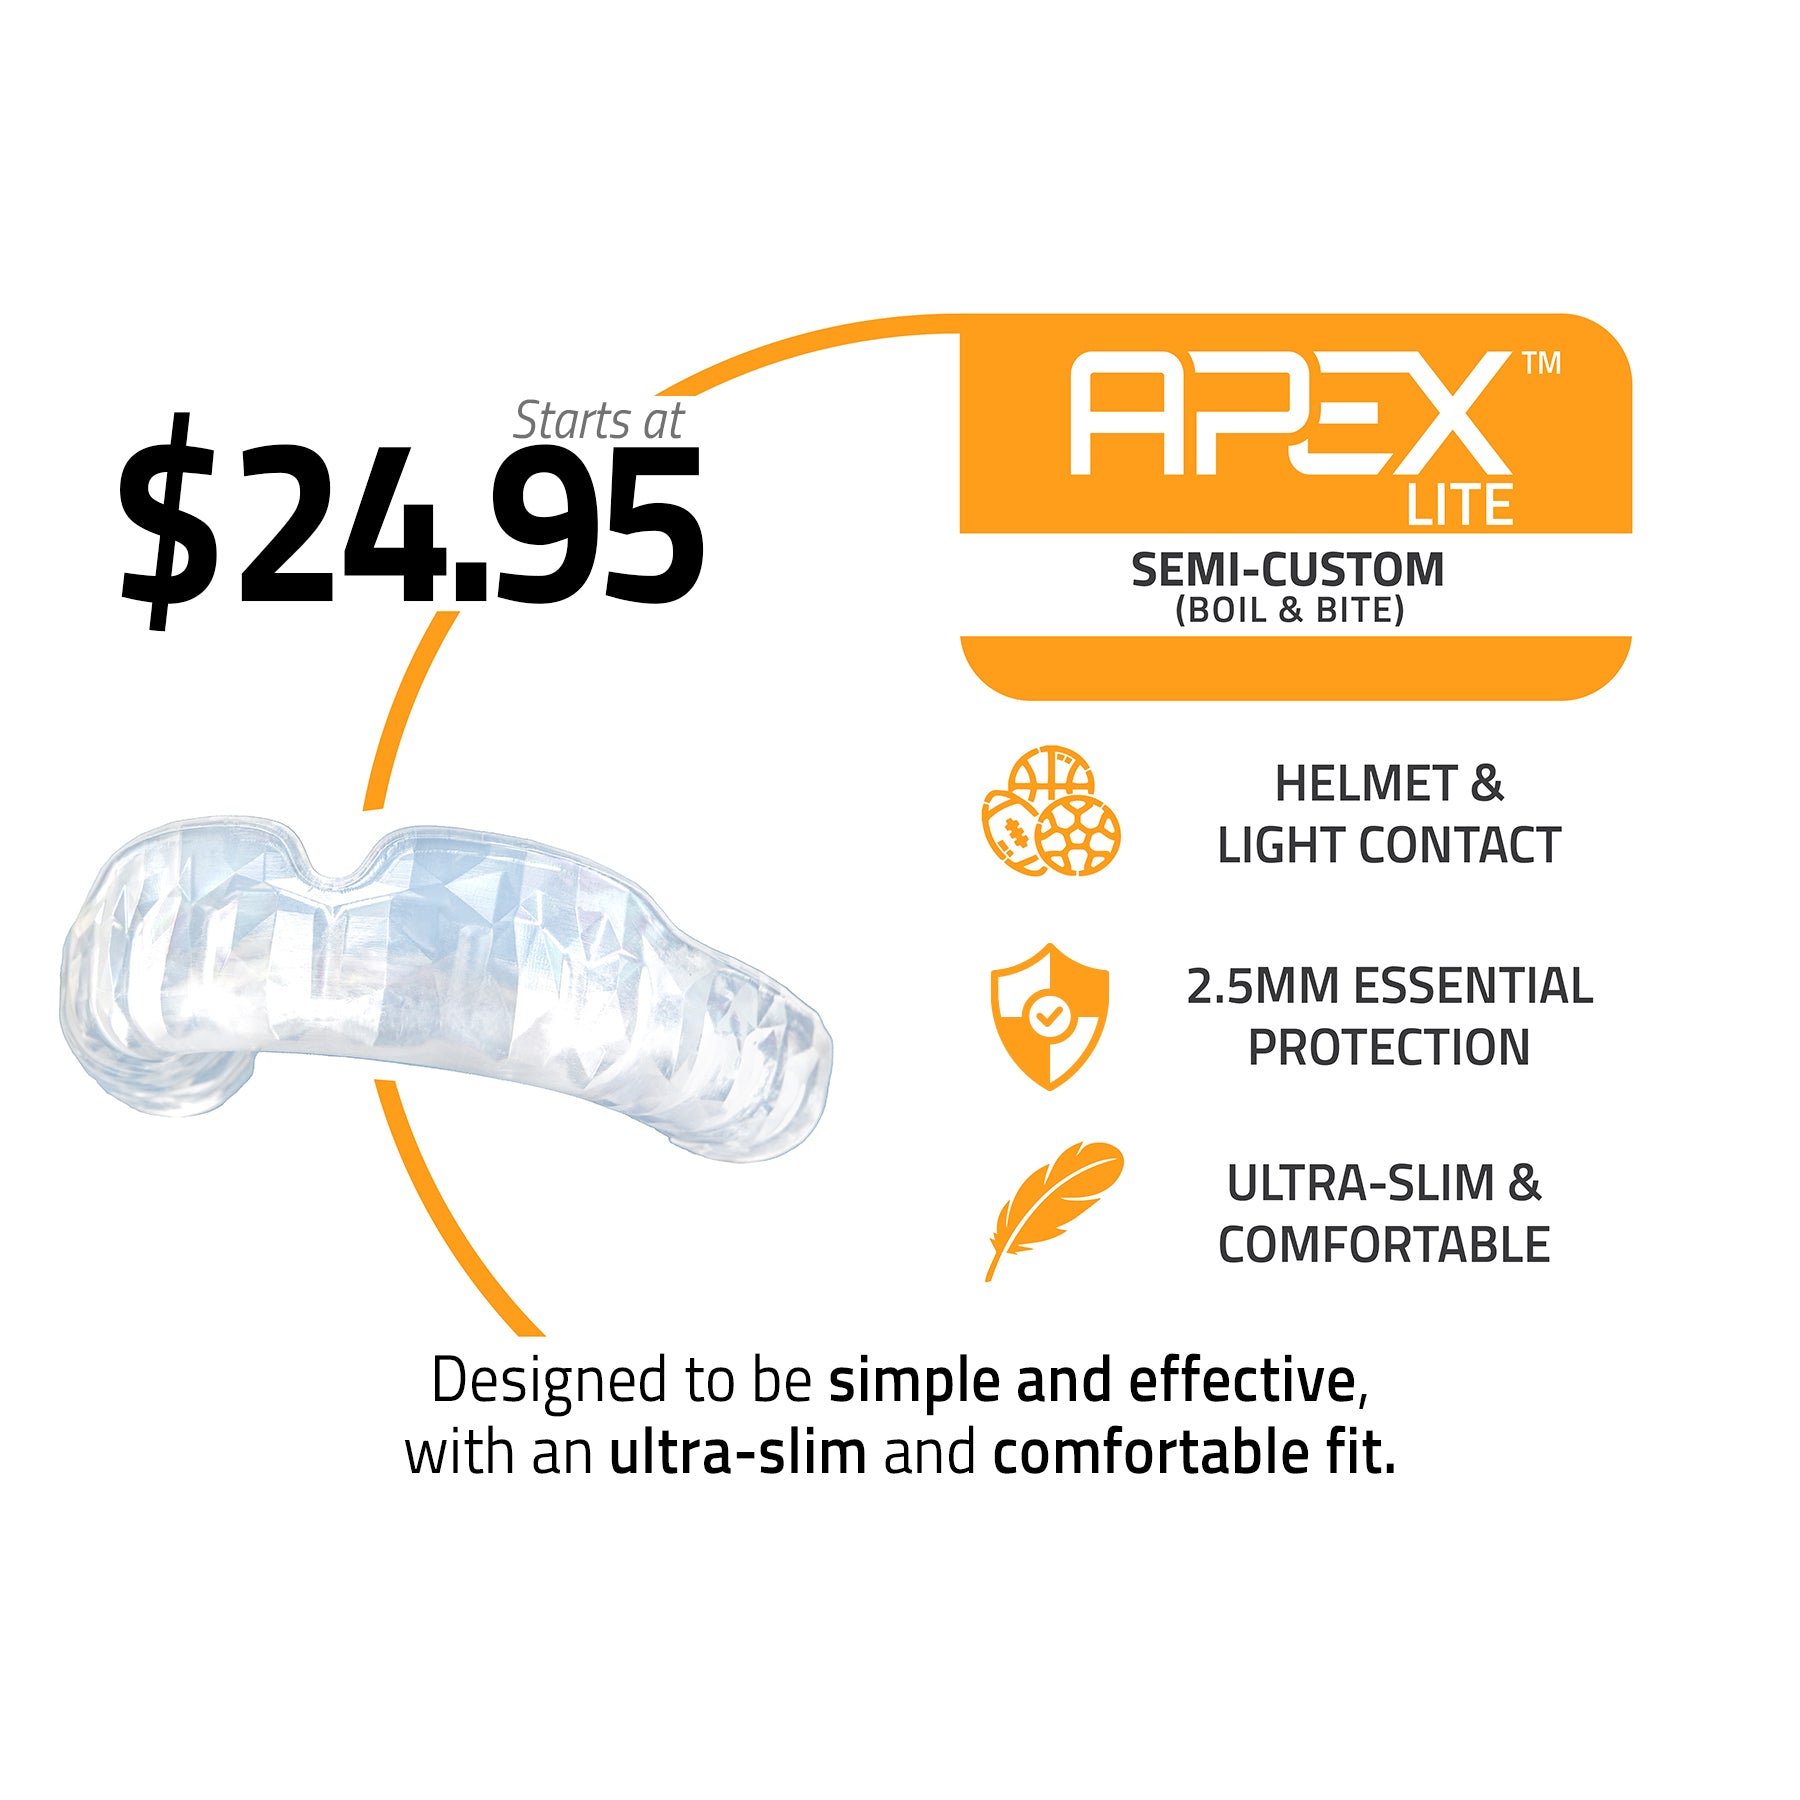 banner, apex lite, semi custom boil and bite,starts at $24.95, specs, helmet and light contact, 2.5mm essential protection, ultra slim and comfortable, designed to be simple and affective, with an ultra slim and comfortable fit.